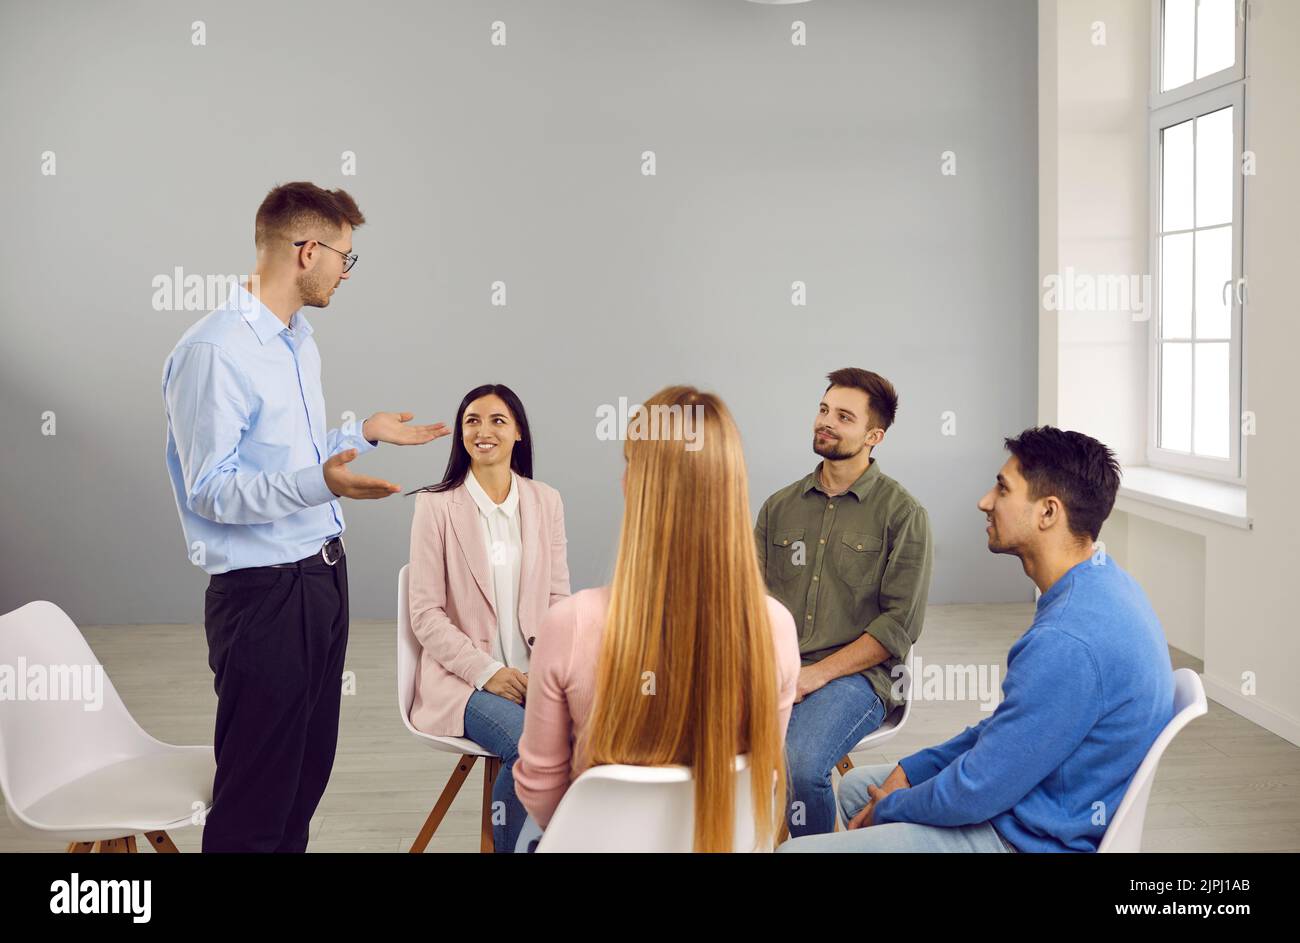 Young smart male coach or team leader speaks during work meeting or creative brainstorm. Stock Photo